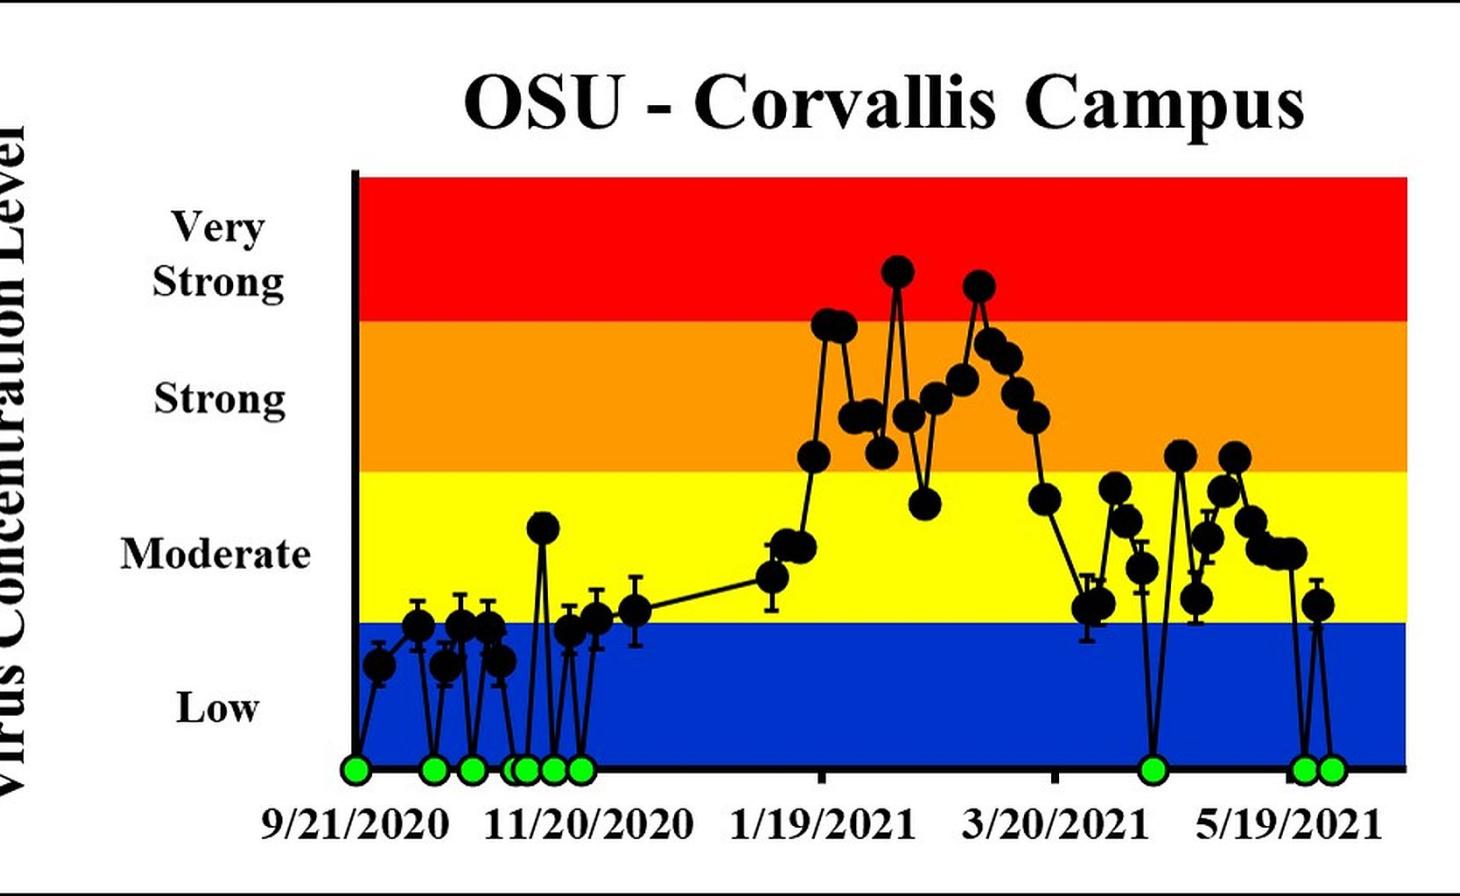 The concentration on the most recent sampling dates indicated a moderate viral load on 5/26/2021 and a viral load below the detection limit on 5/30/2021 at OSU Corvallis Campus